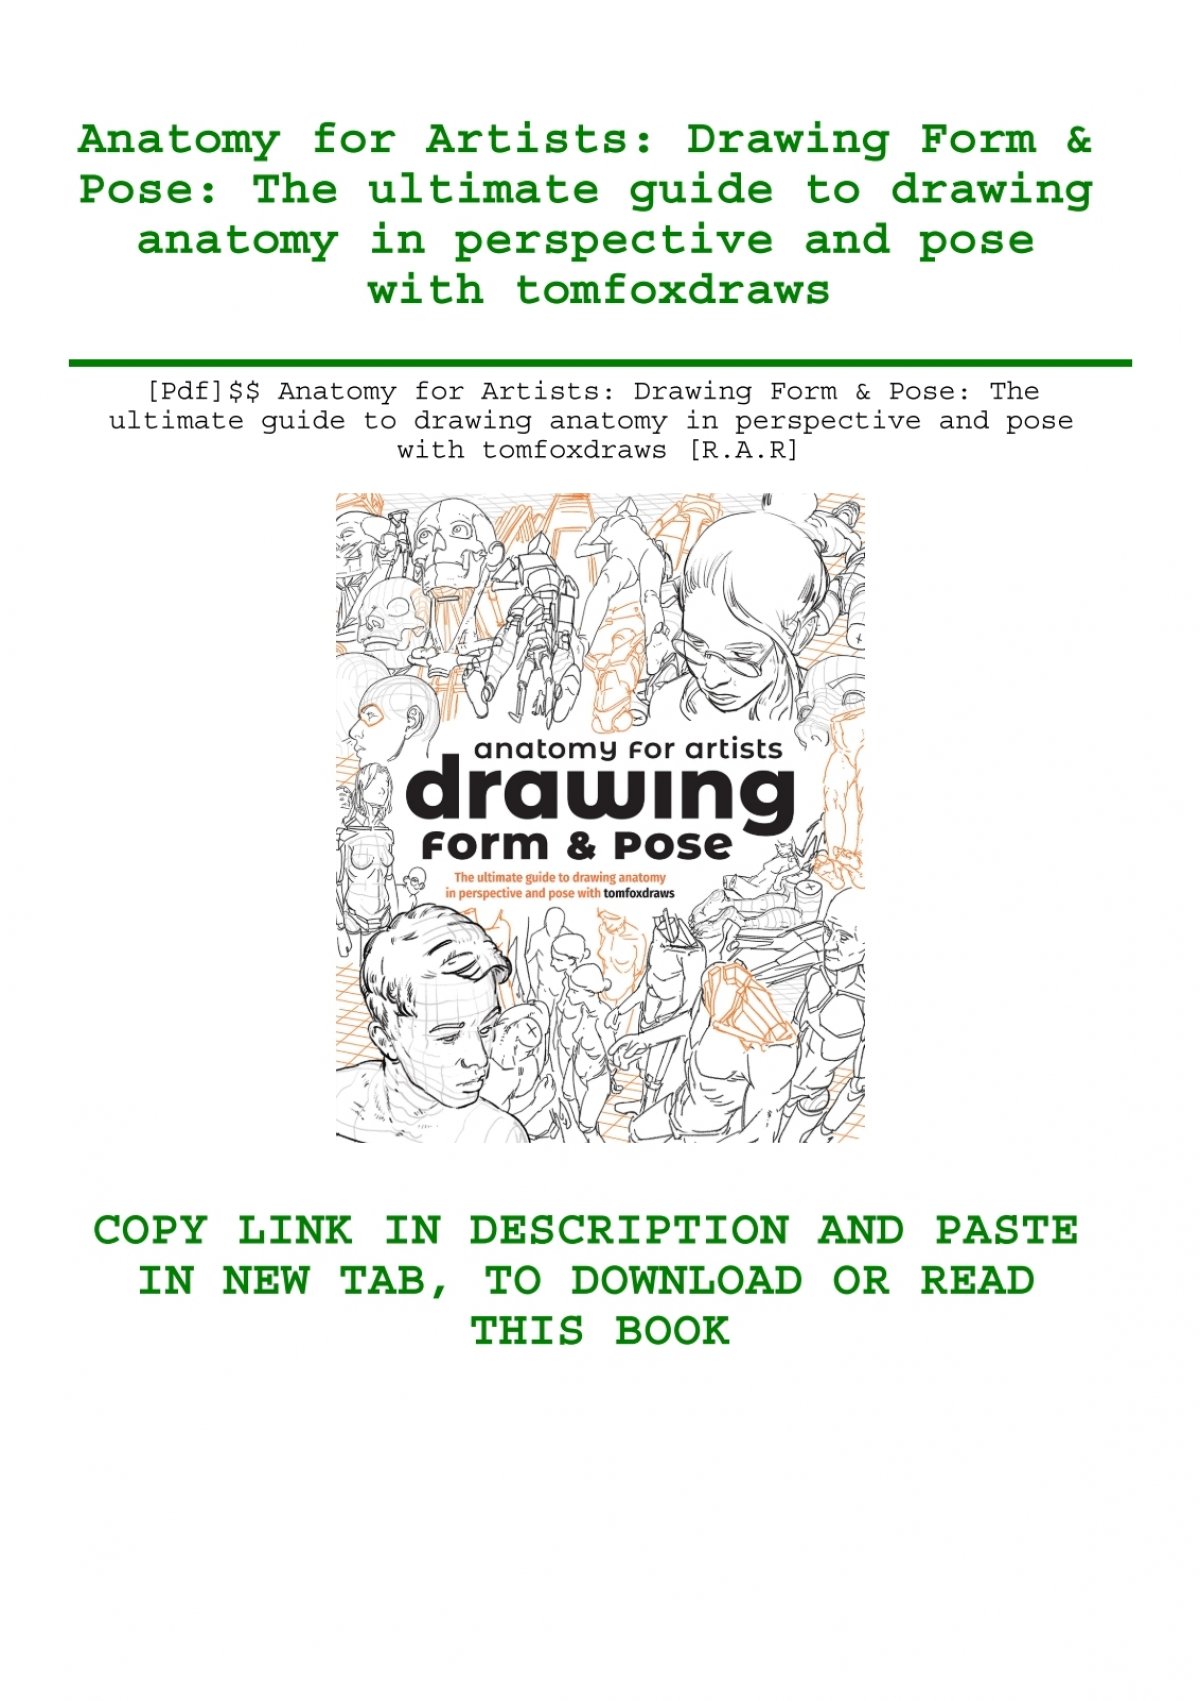 pdf-anatomy-for-artists-drawing-form-pose-the-ultimate-guide-to